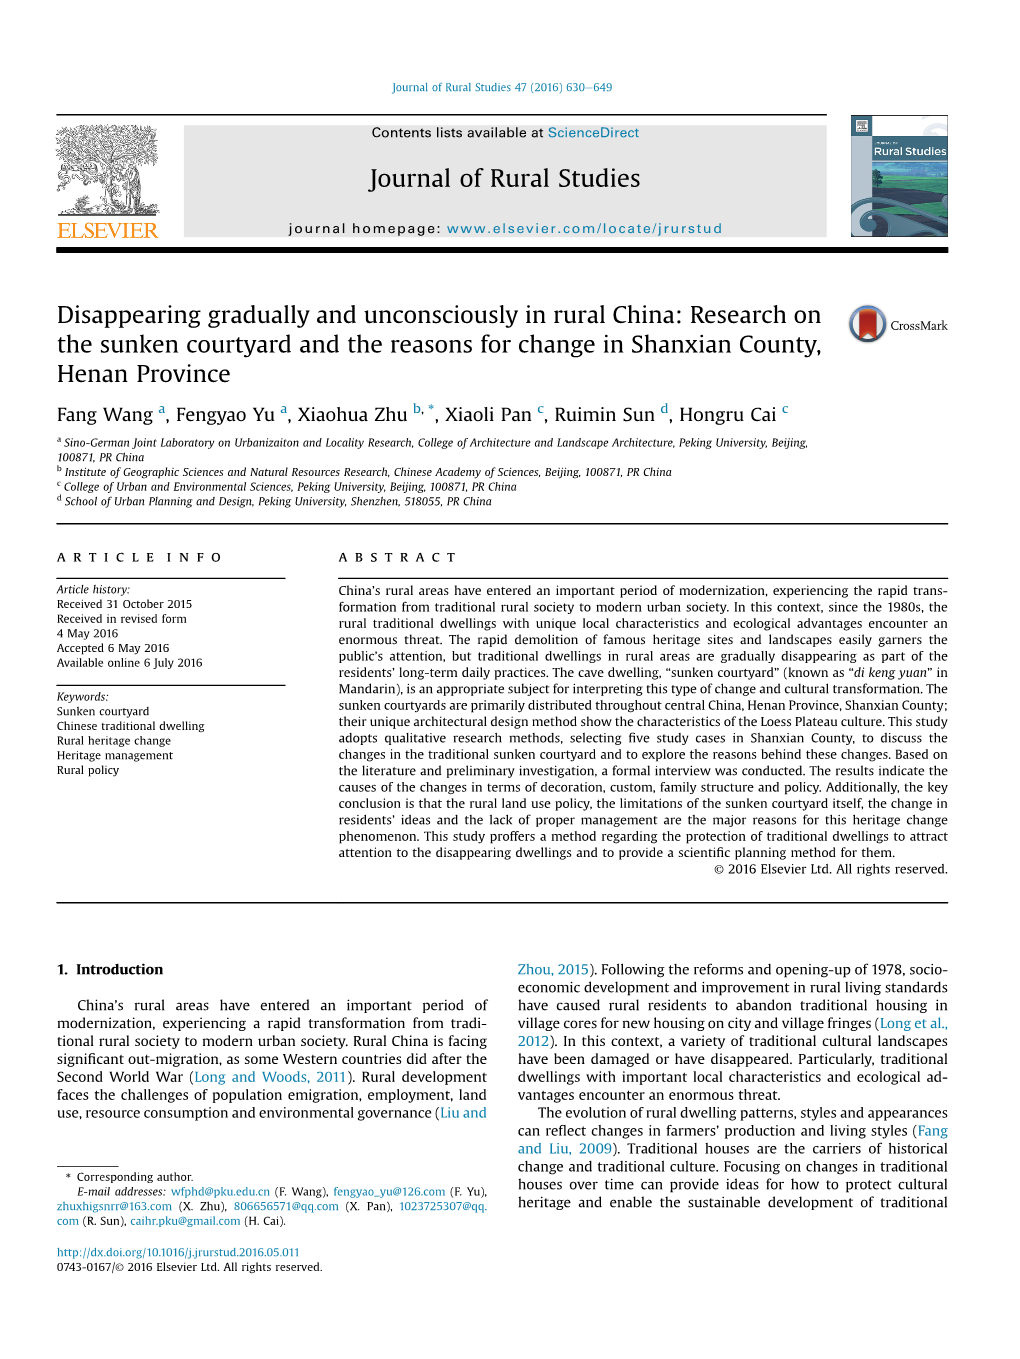 Disappearing Gradually and Unconsciously in Rural China: Research on the Sunken Courtyard and the Reasons for Change in Shanxian County, Henan Province